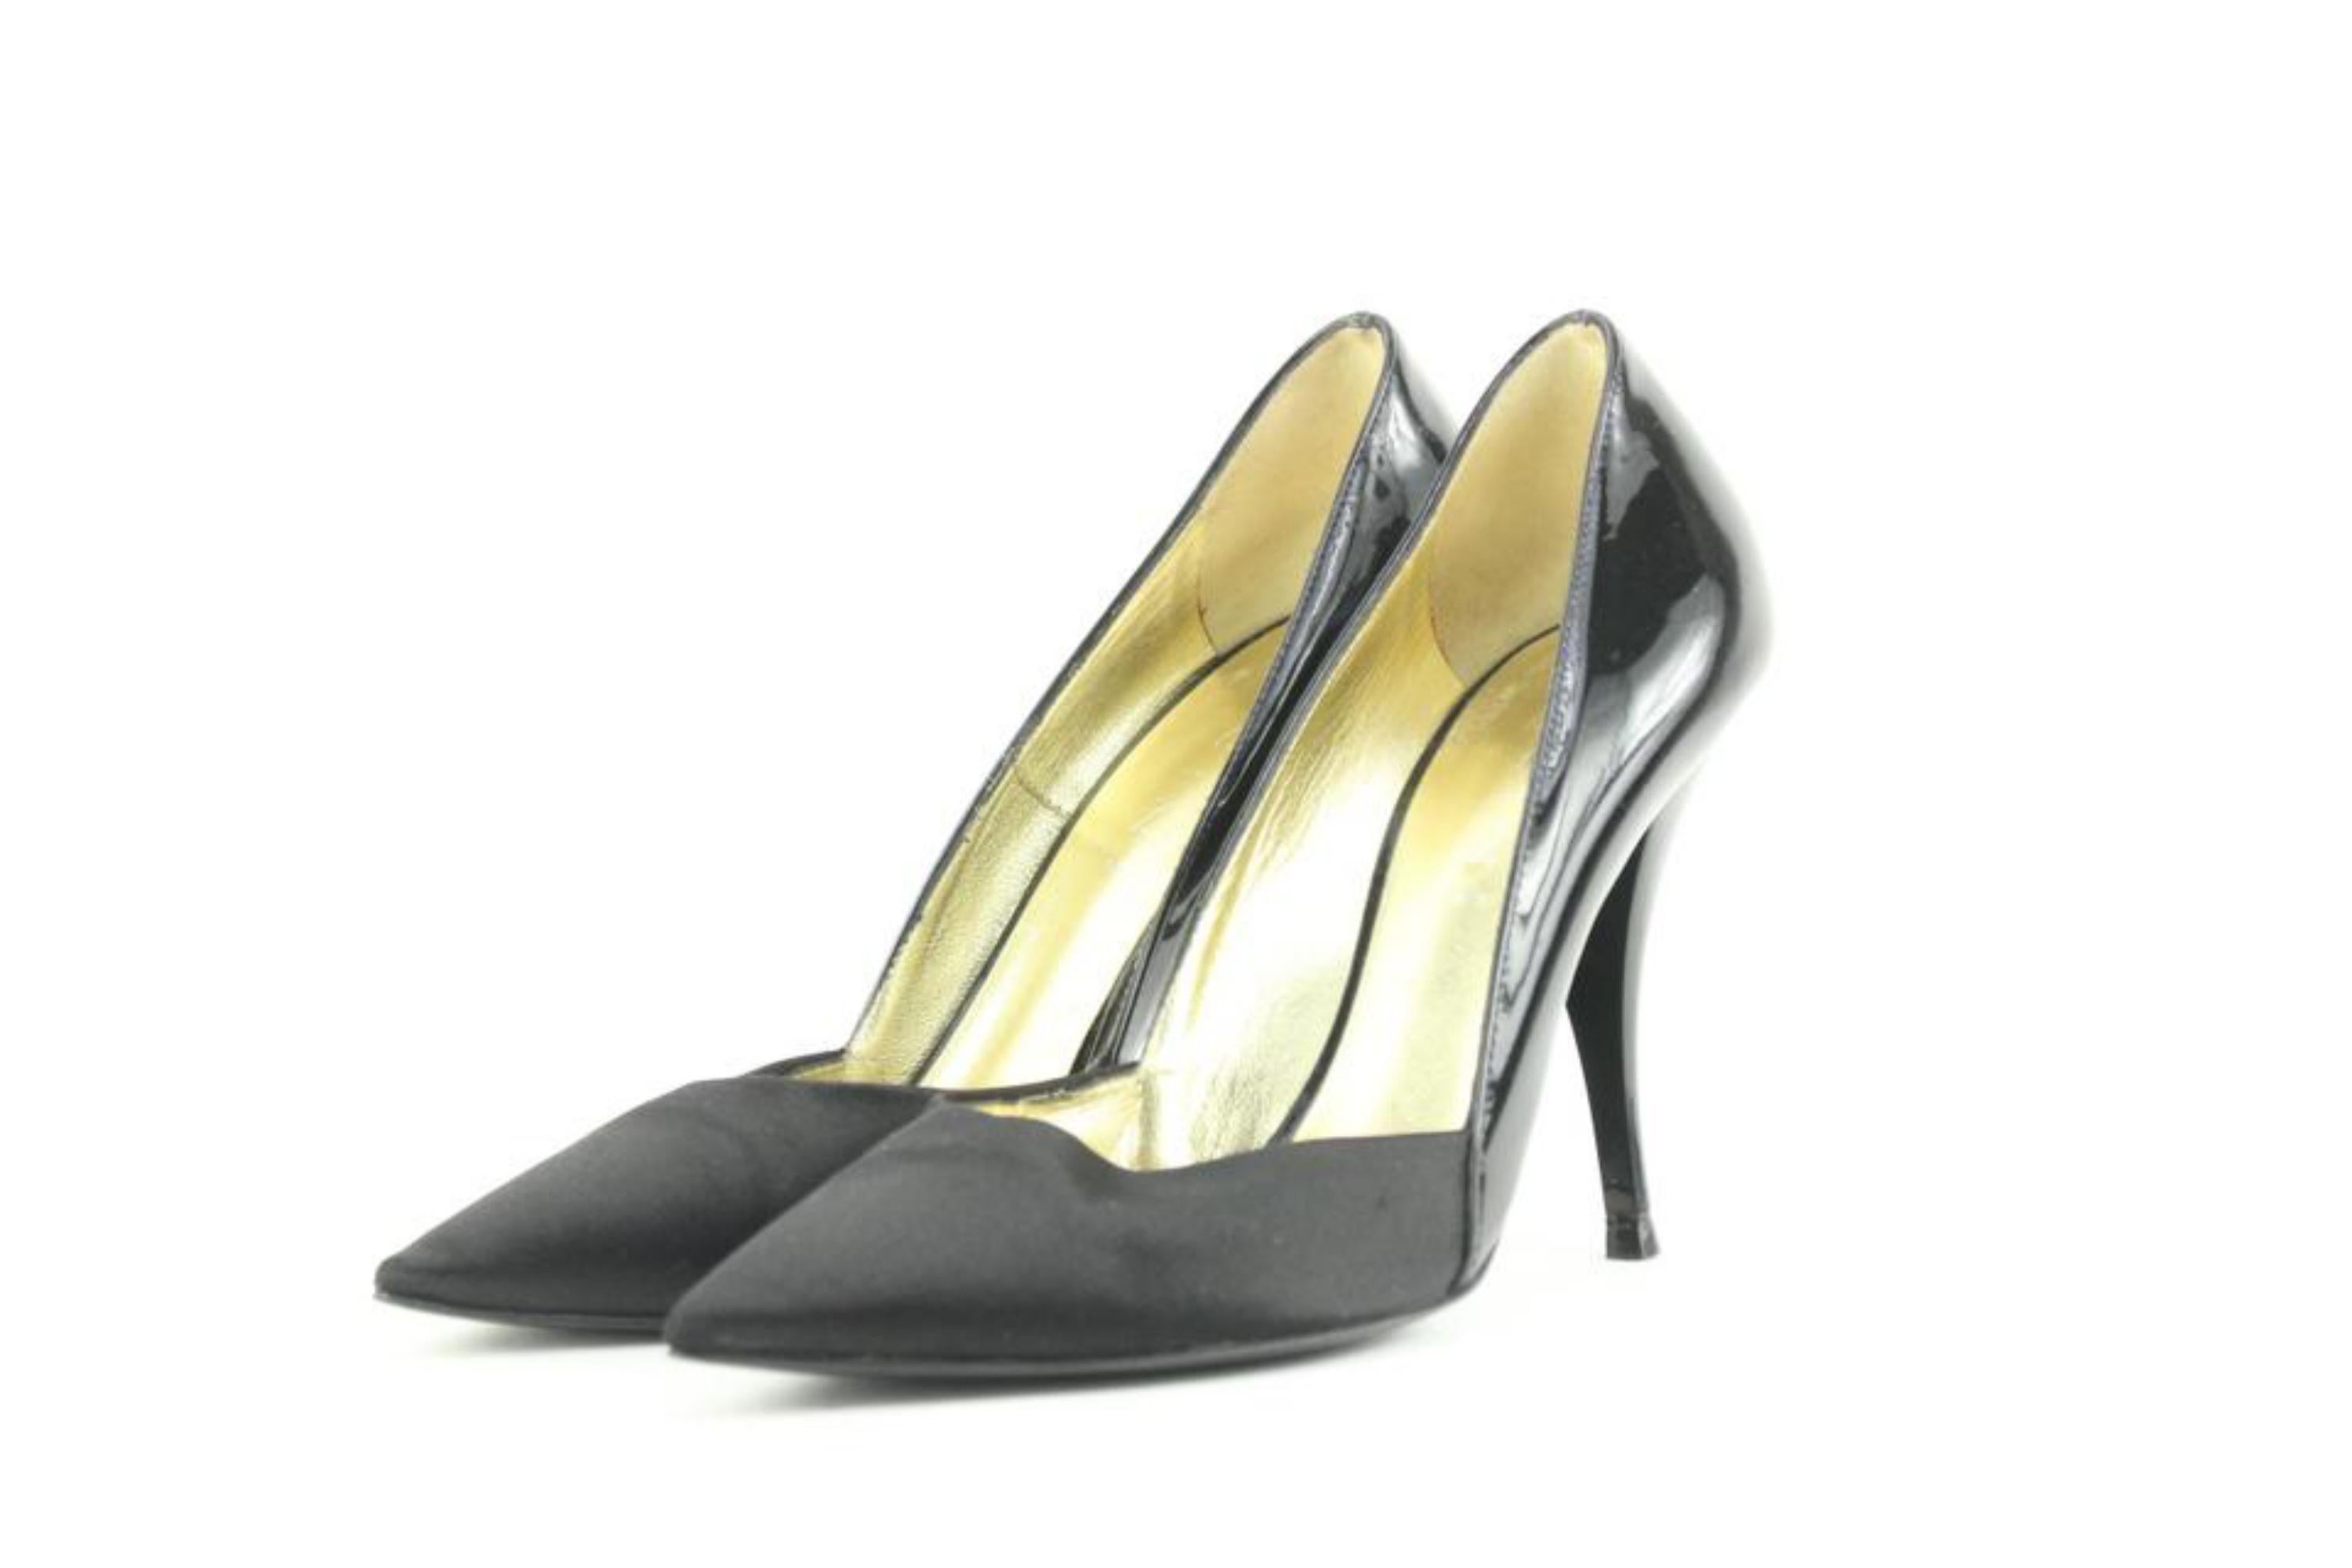 Tom Ford Heeled shoes & Wedges for Women sale - discounted price |  FASHIOLA.in